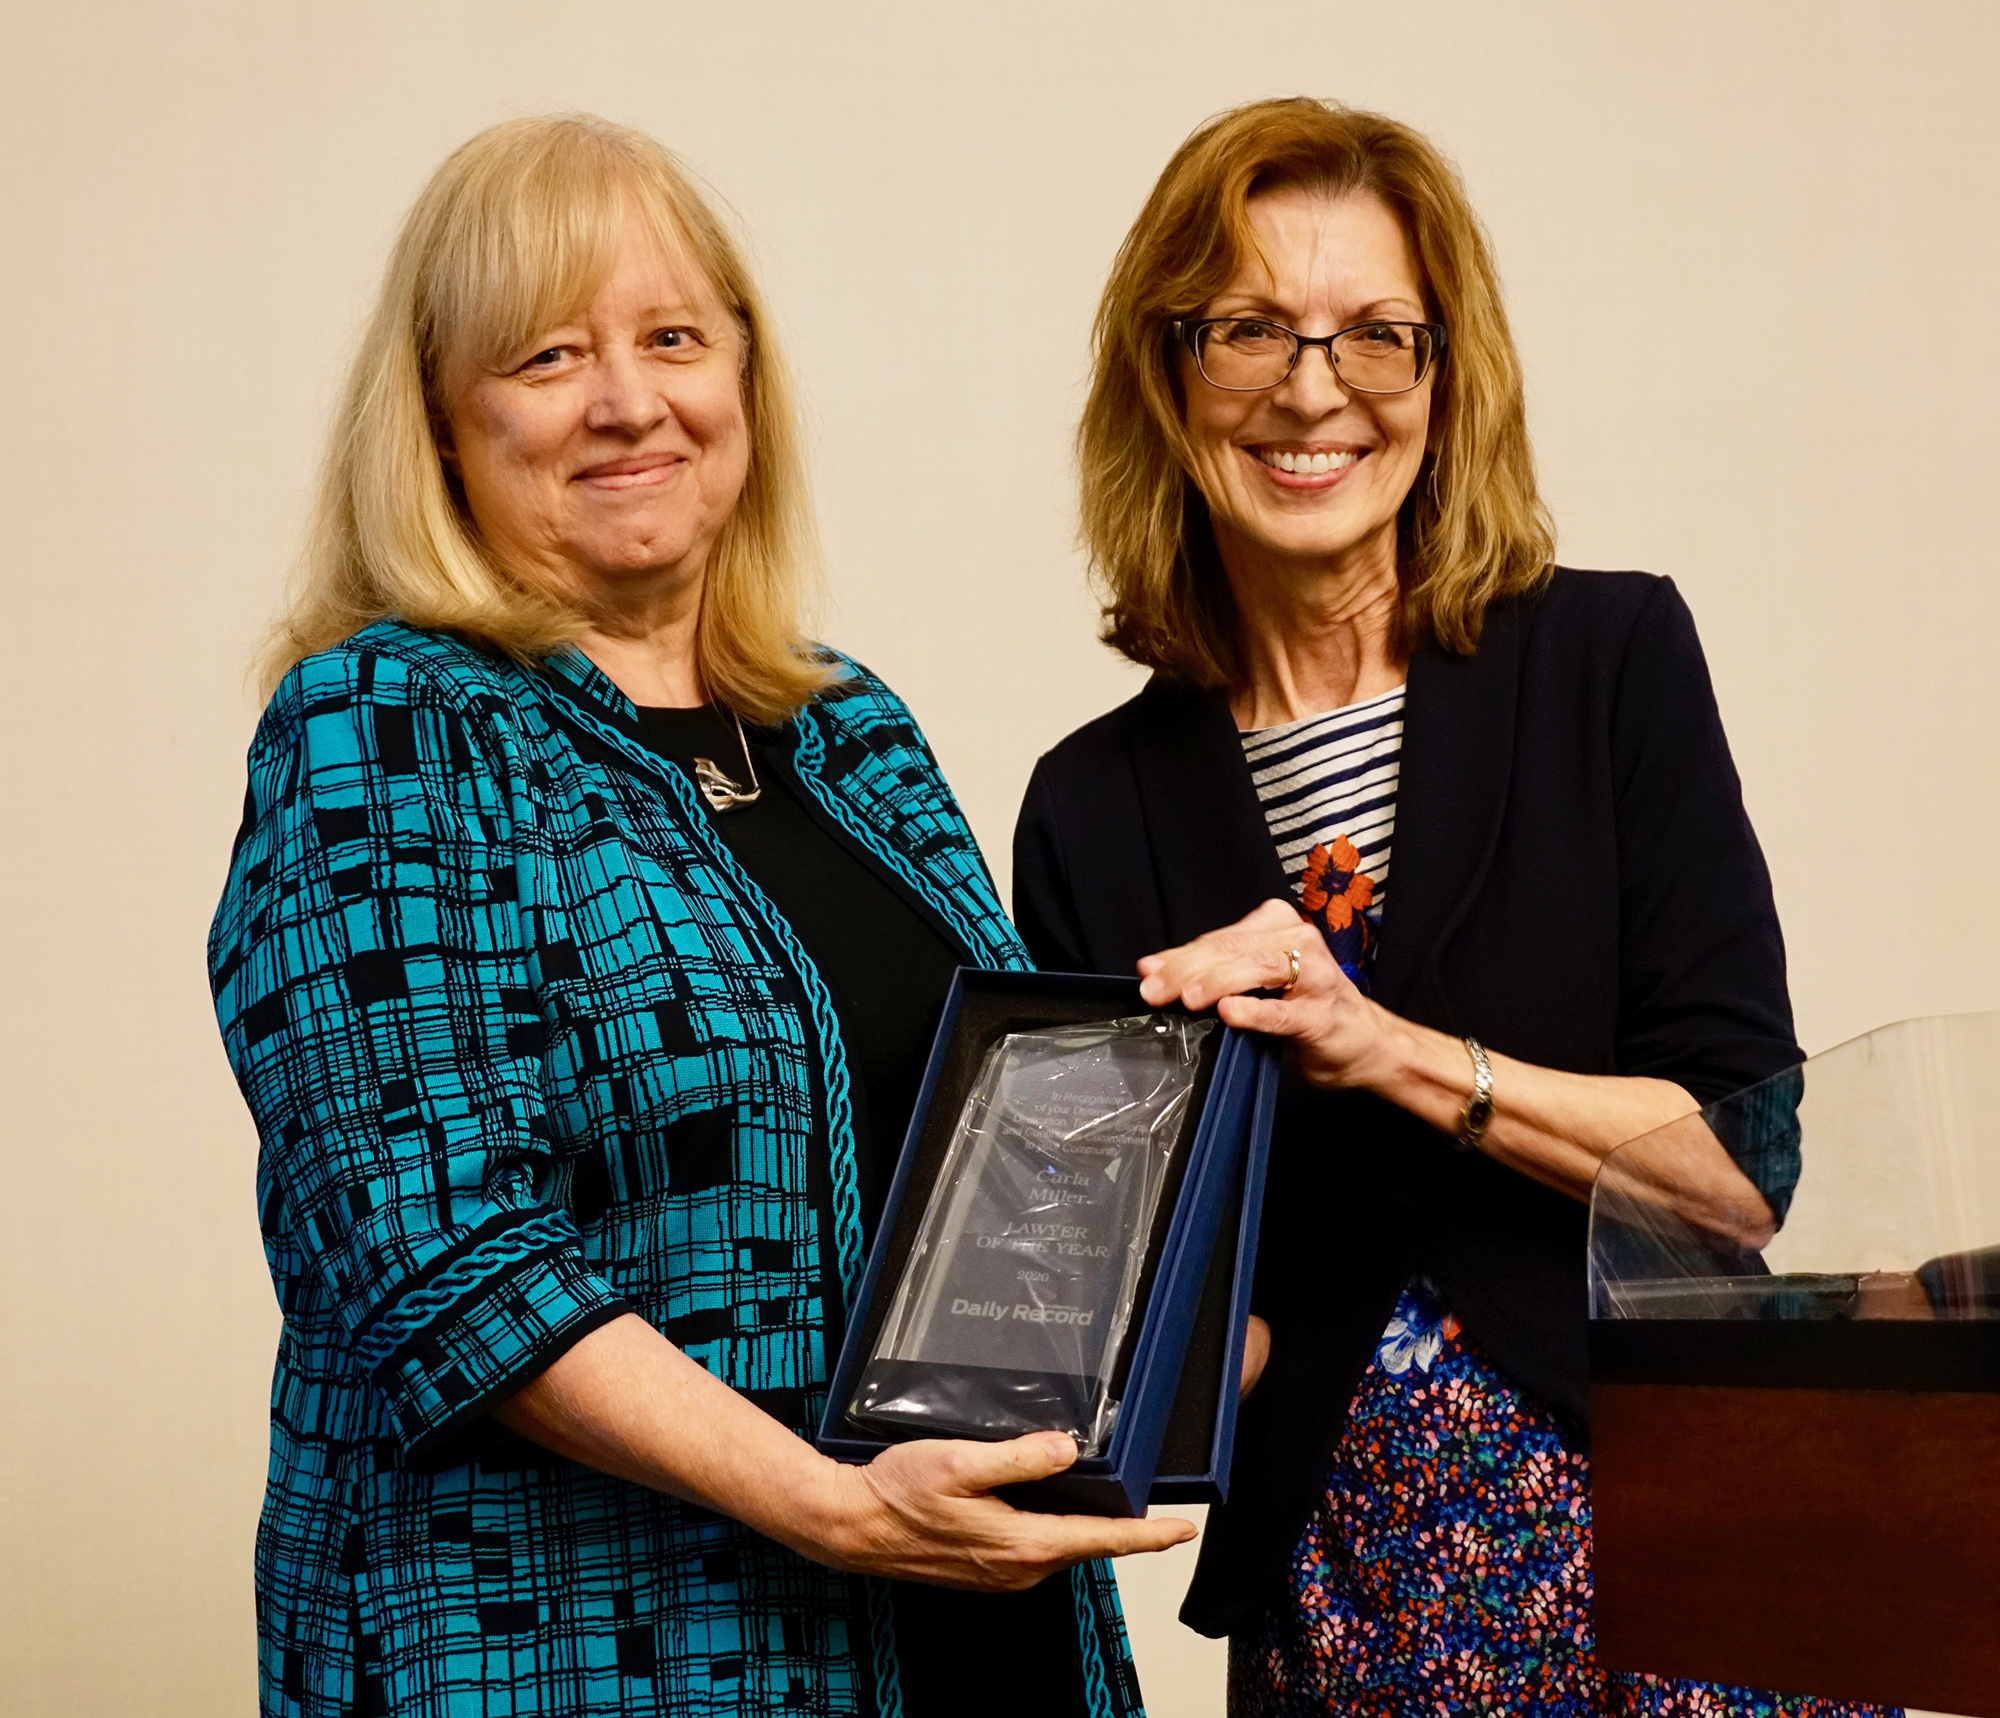 Carla Miller, the 2020 Jacksonville Daily Record Lawyer of the Year, accepts her award in person from Editor Karen Brune Mathis. The Law Day luncheon was virtual last year because of COVID-19.